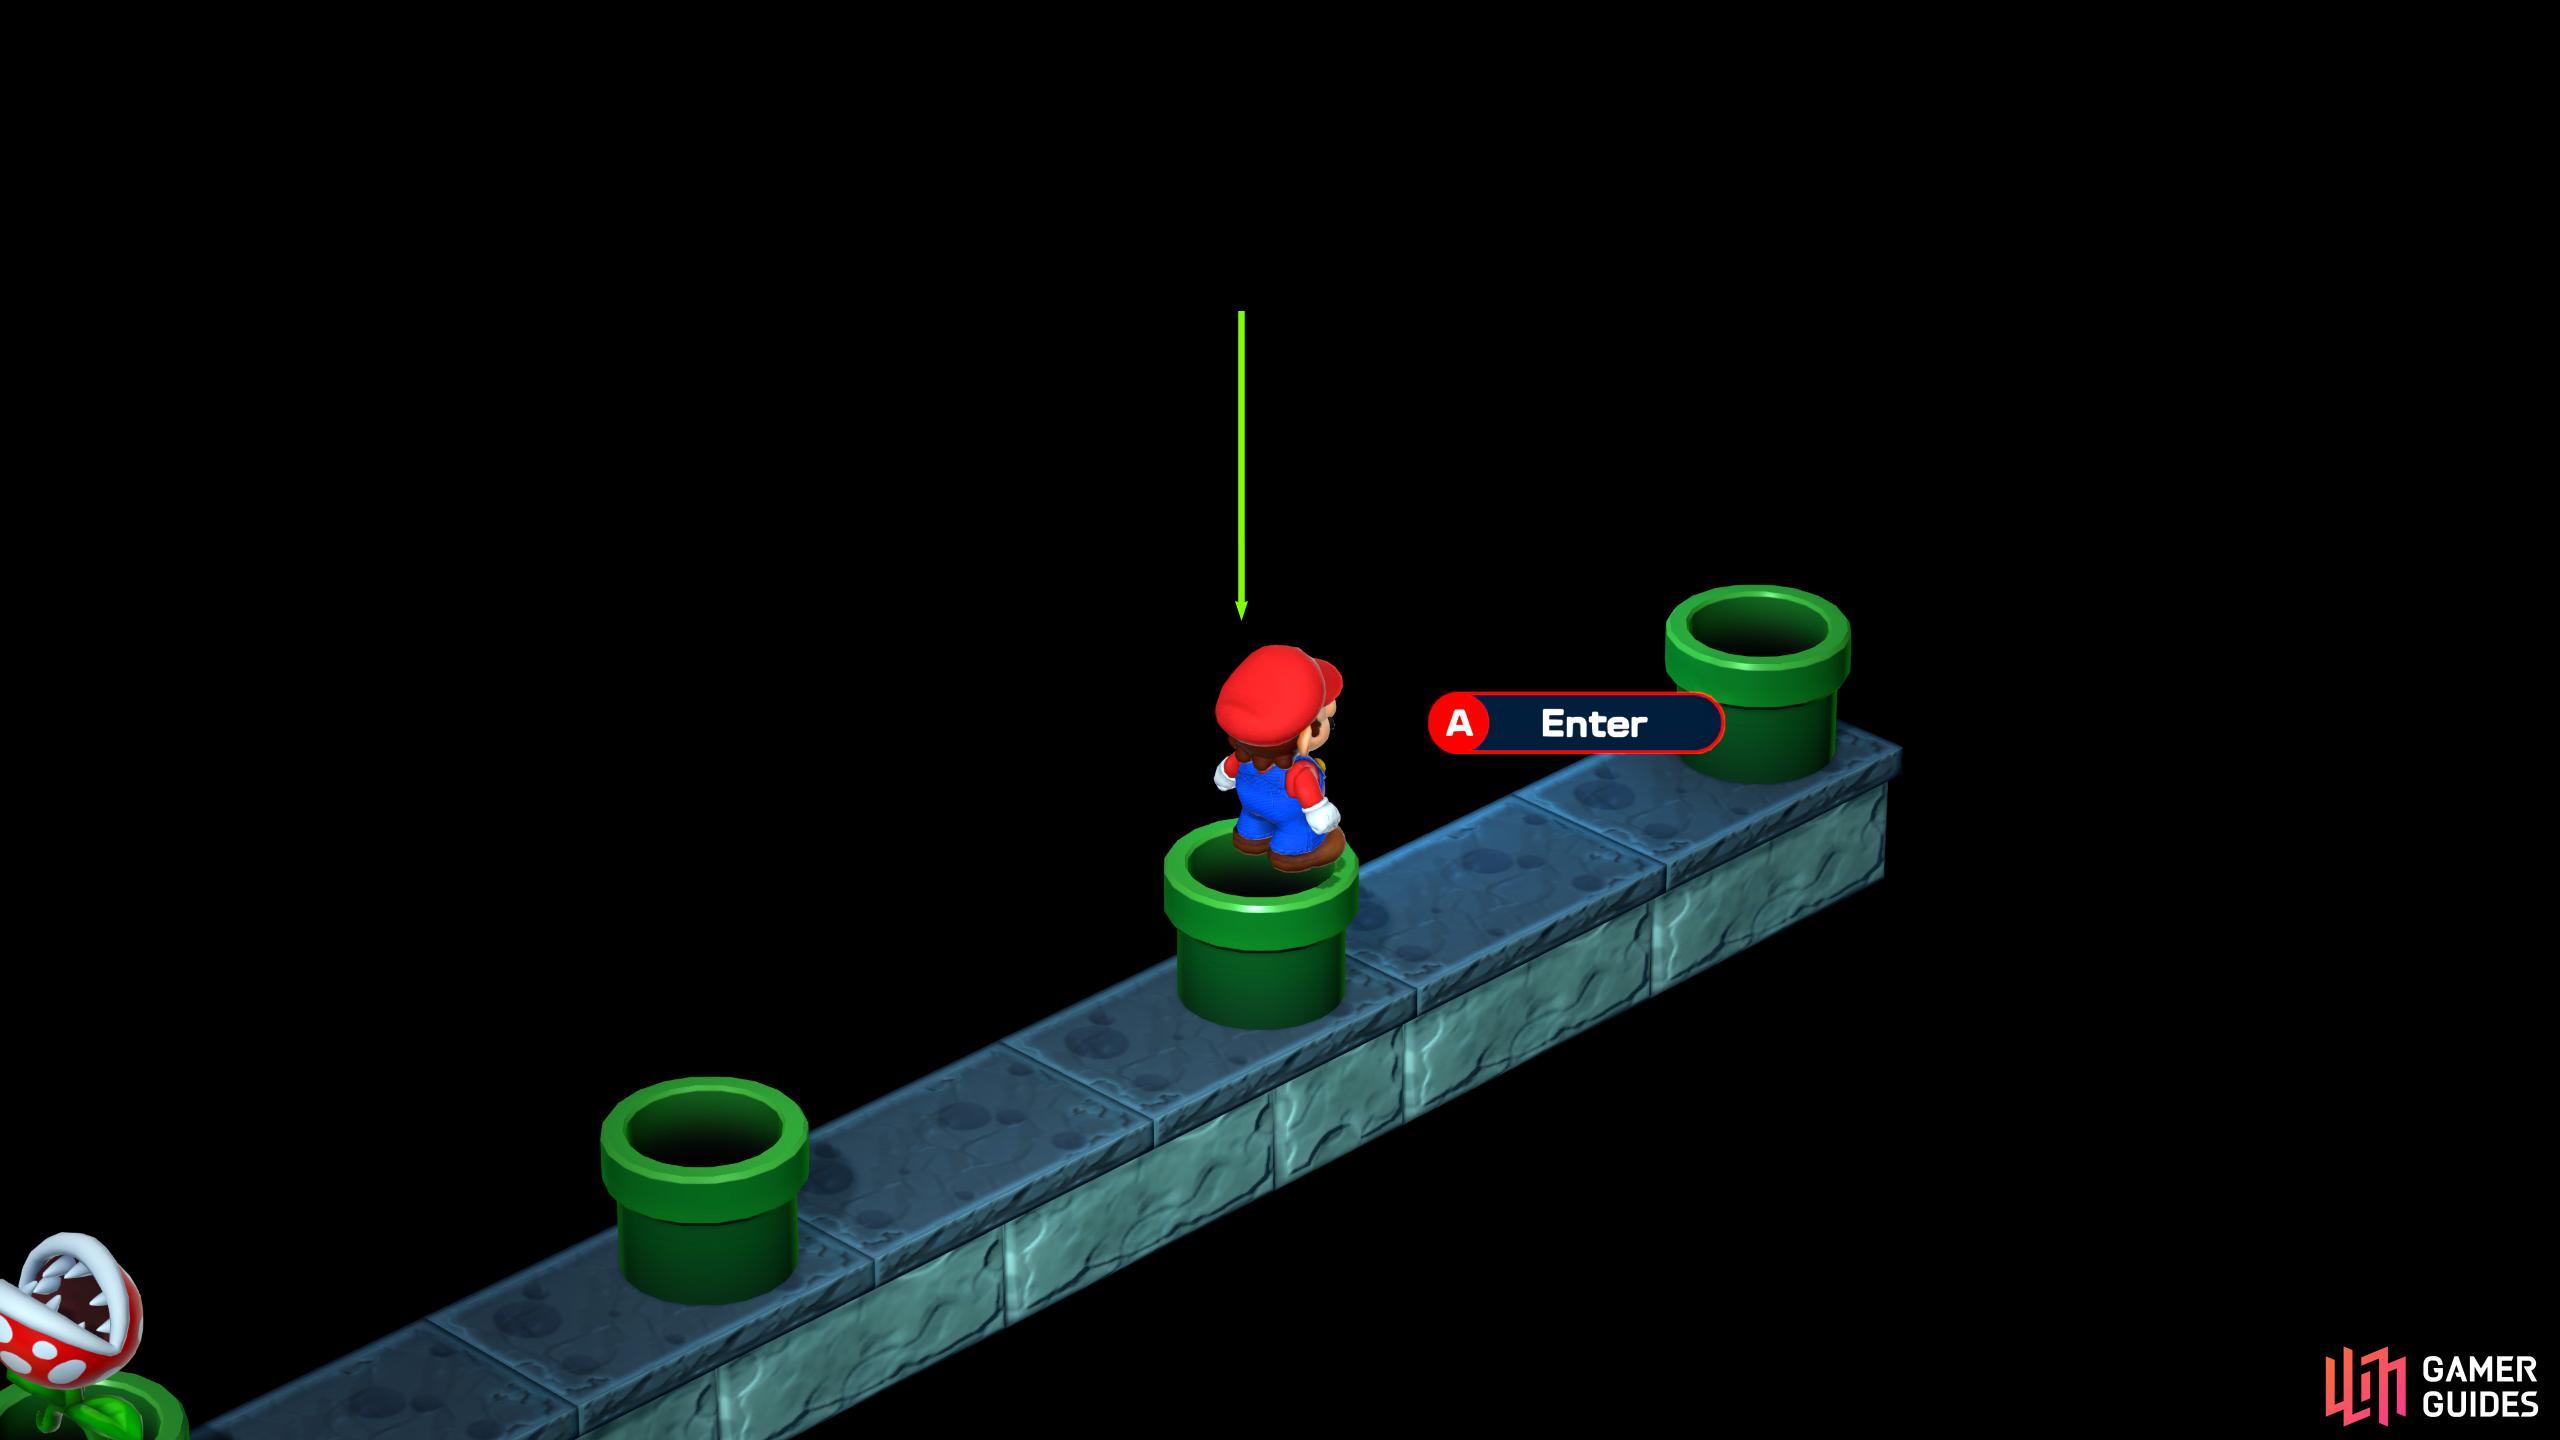 Finally, head to the second from last pipe, and take it down to find the minigame.